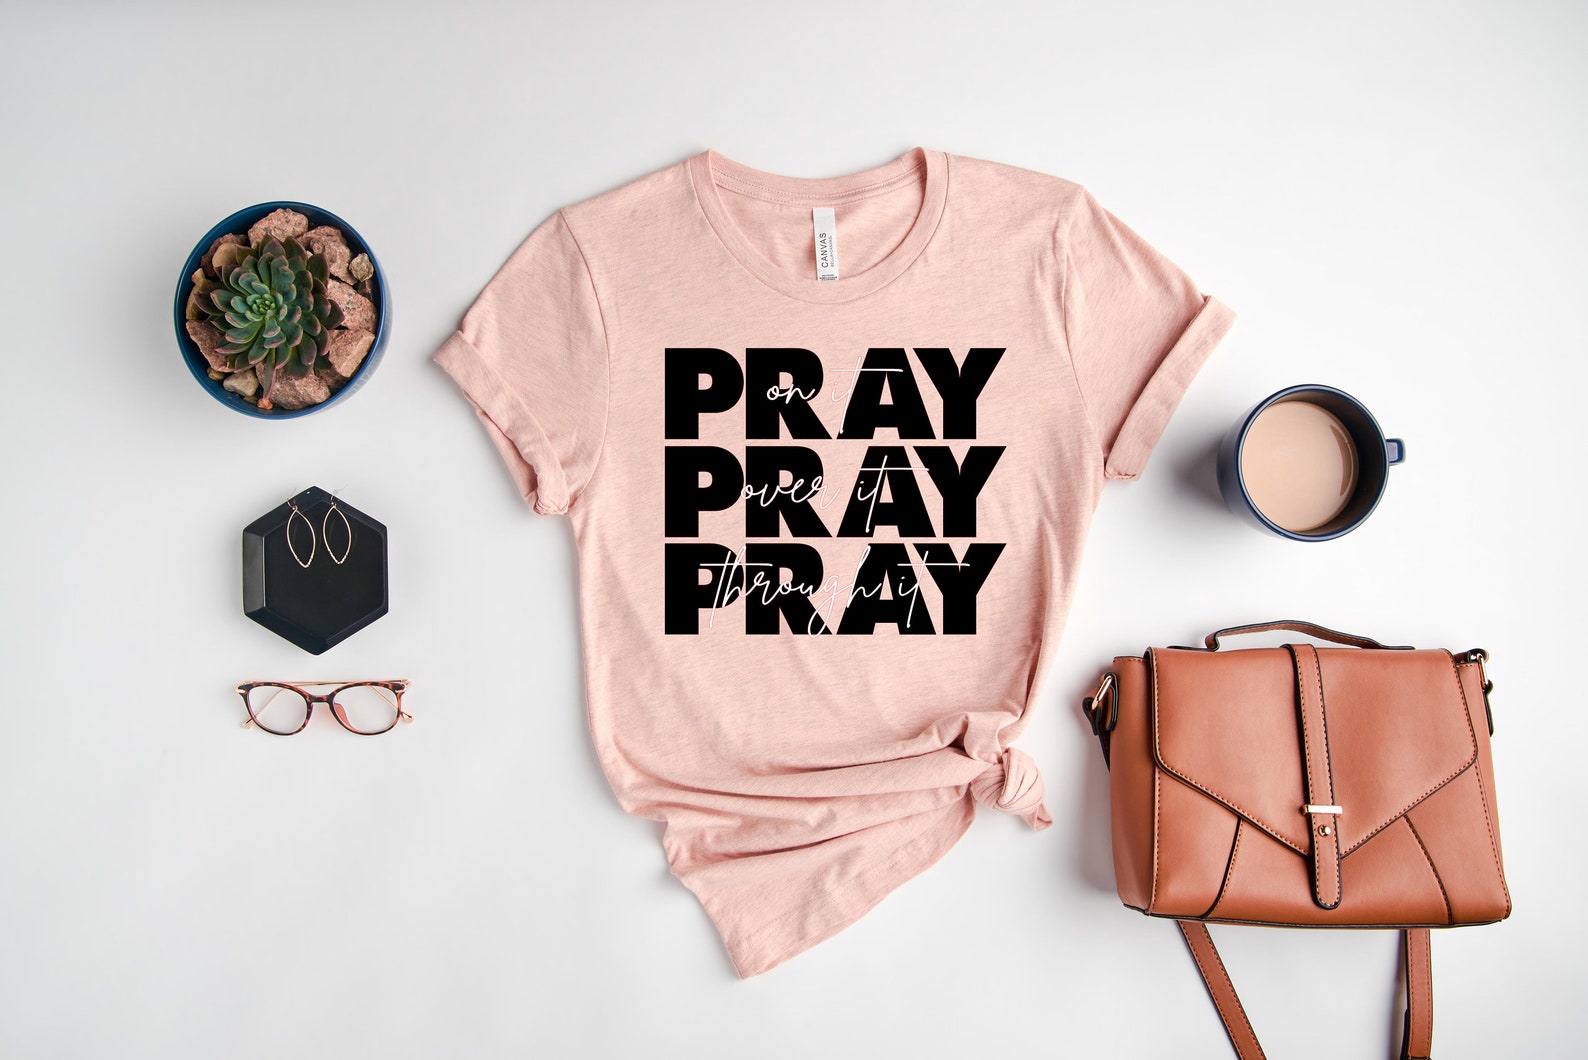 Pray On It Shirt Pray Over It Shirt Christian Gifts For | Etsy